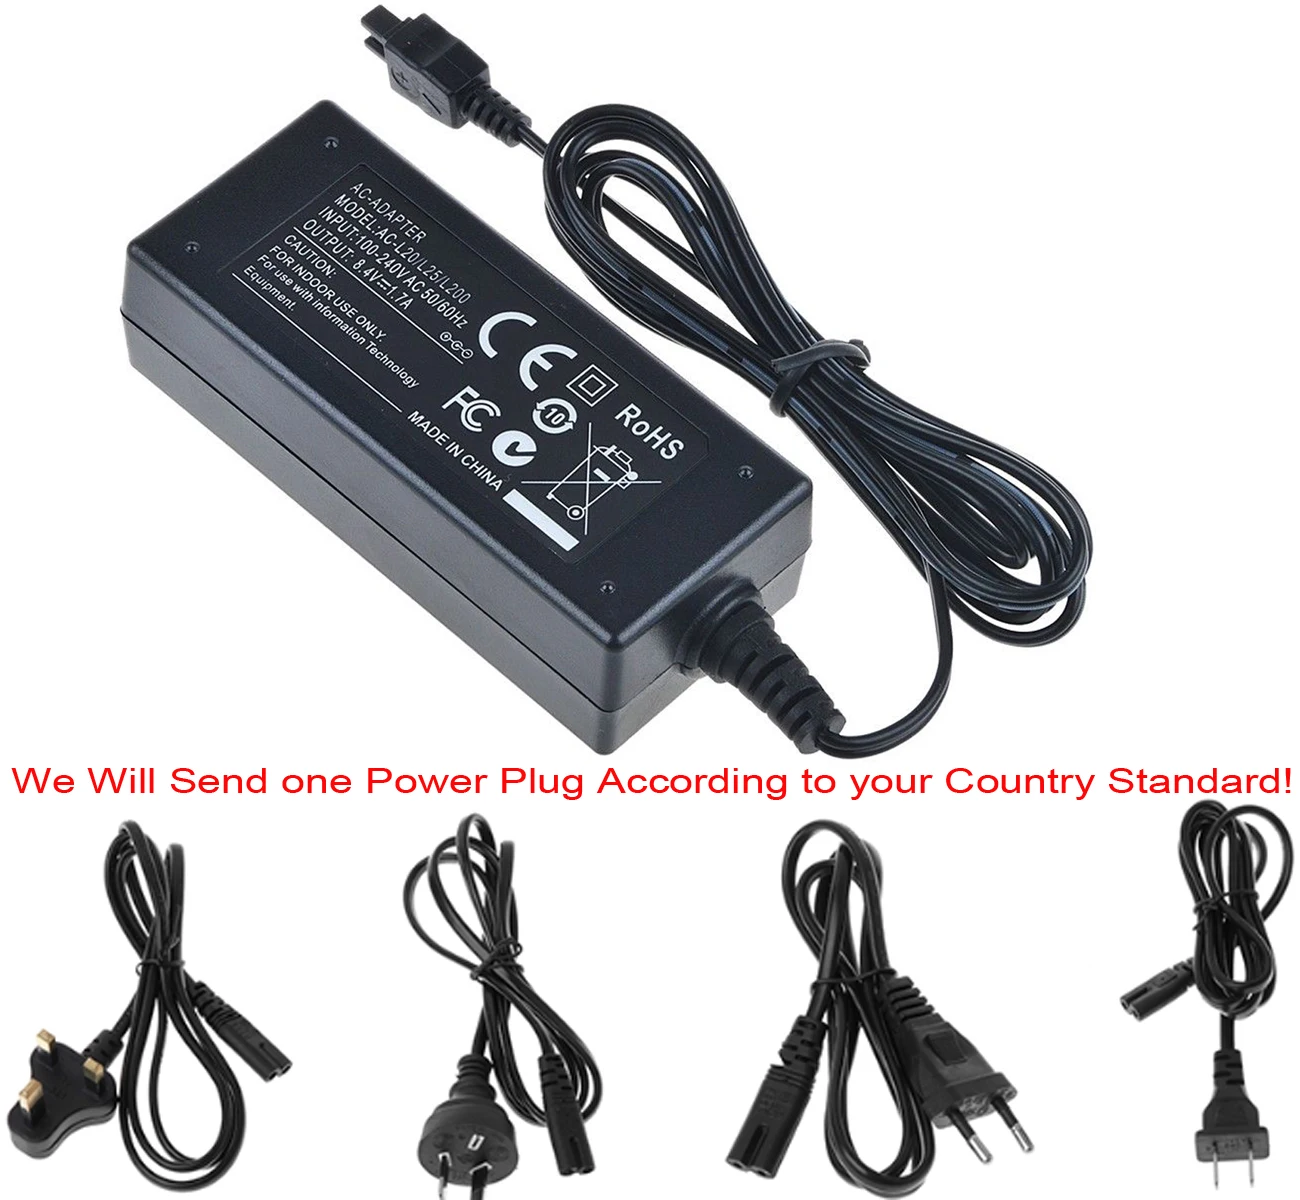 HDR-CX110E HDR-CX150E HDR-CX155E Handycam Camcorder AC Power Adapter Charger for Sony HDR-CX100E HDR-CX130E